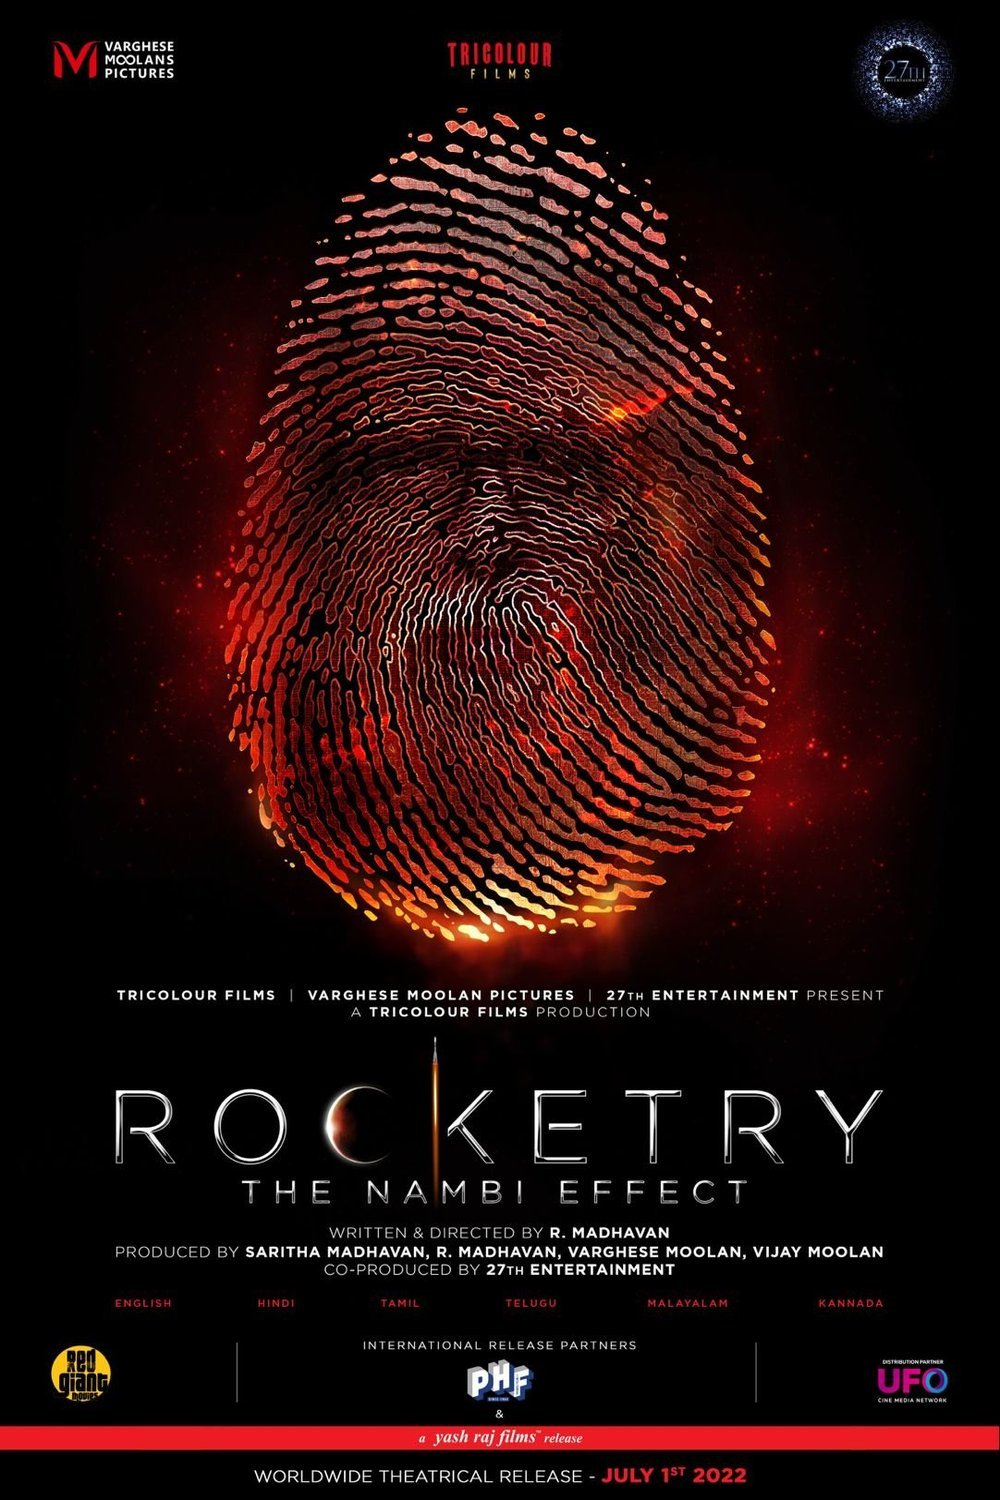 Hindi poster of the movie Rocketry: The Nambi Effect